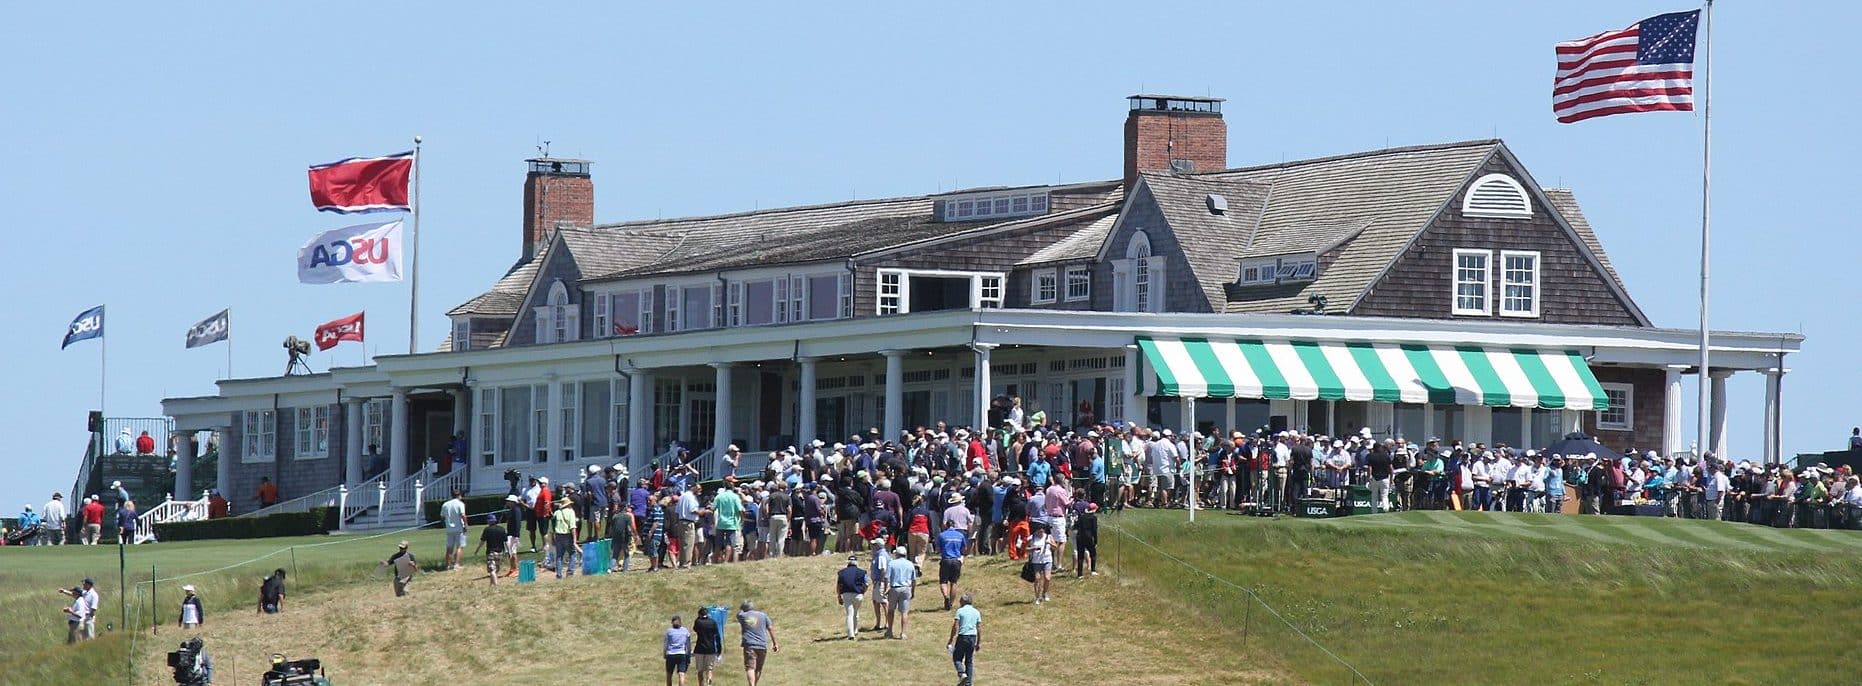 Pennsylvania Ticket Brokers Charged With Fraud in U.S. Open Insider Case